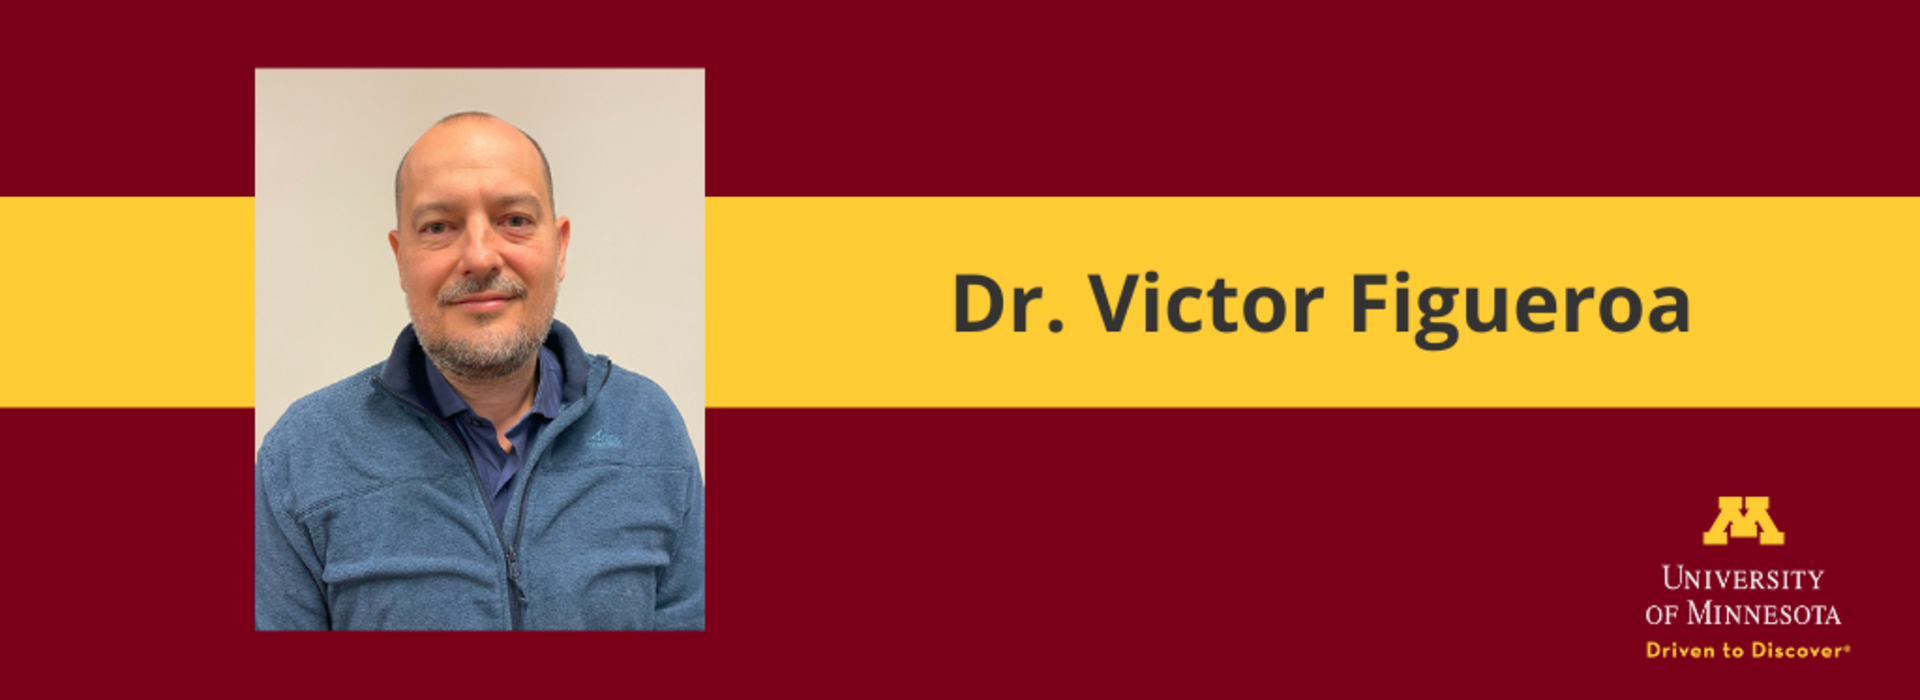 New faculty hire graphic for Dr. Figueroa